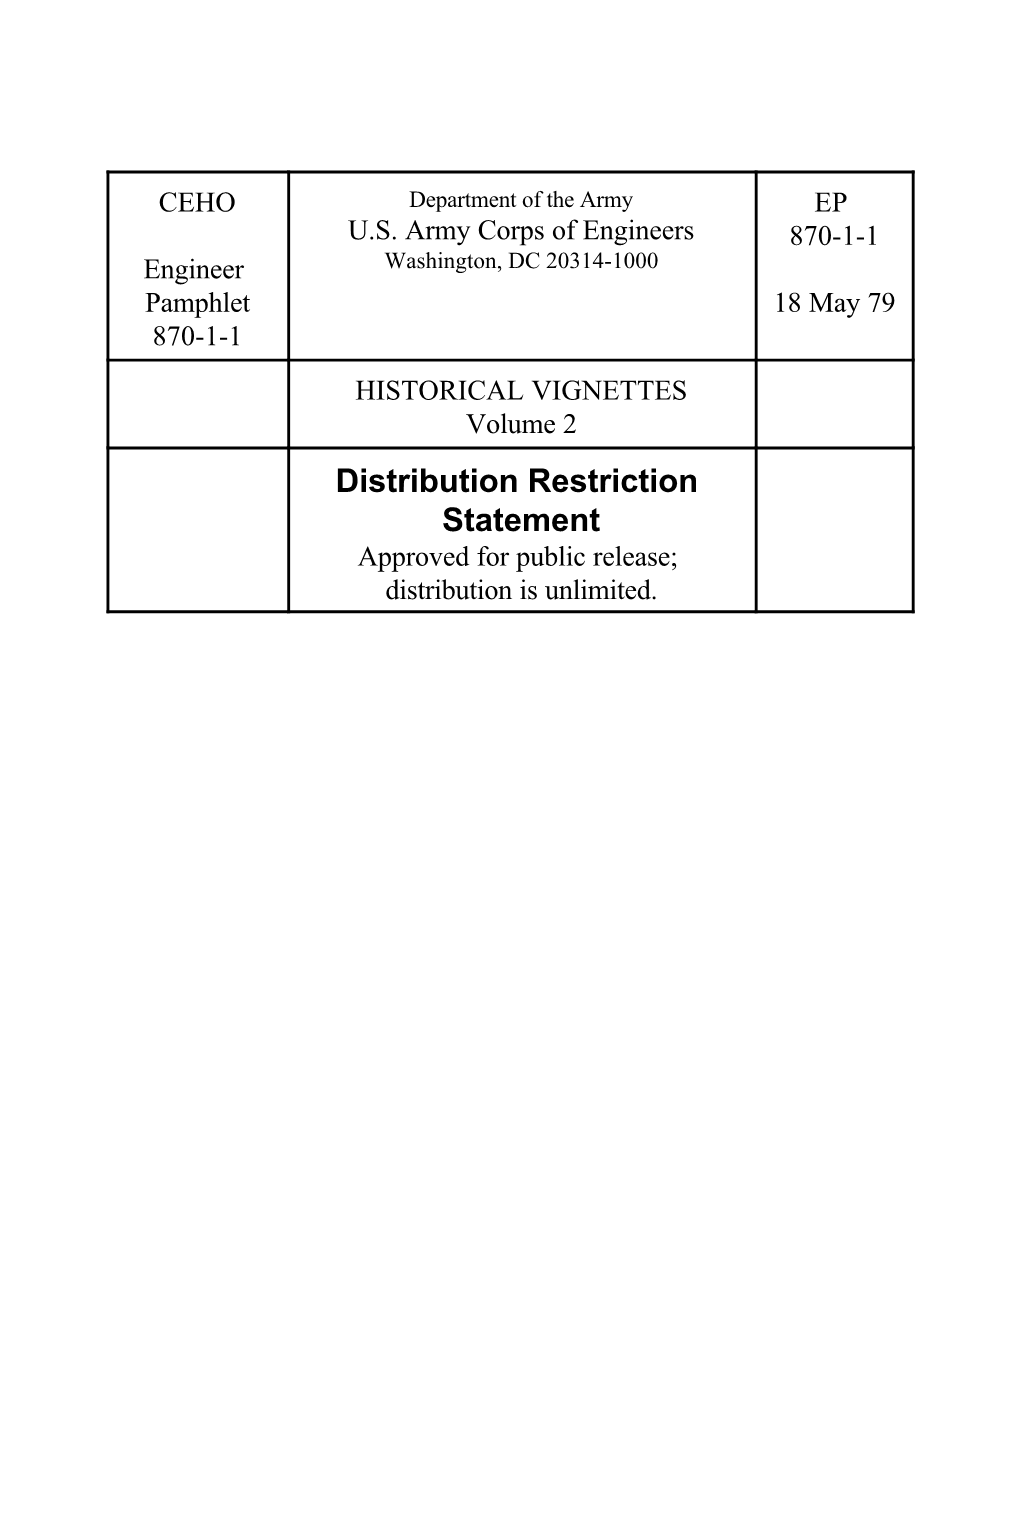 Distribution Restriction Statement Approved for Public Release; Distribution Is Unlimited